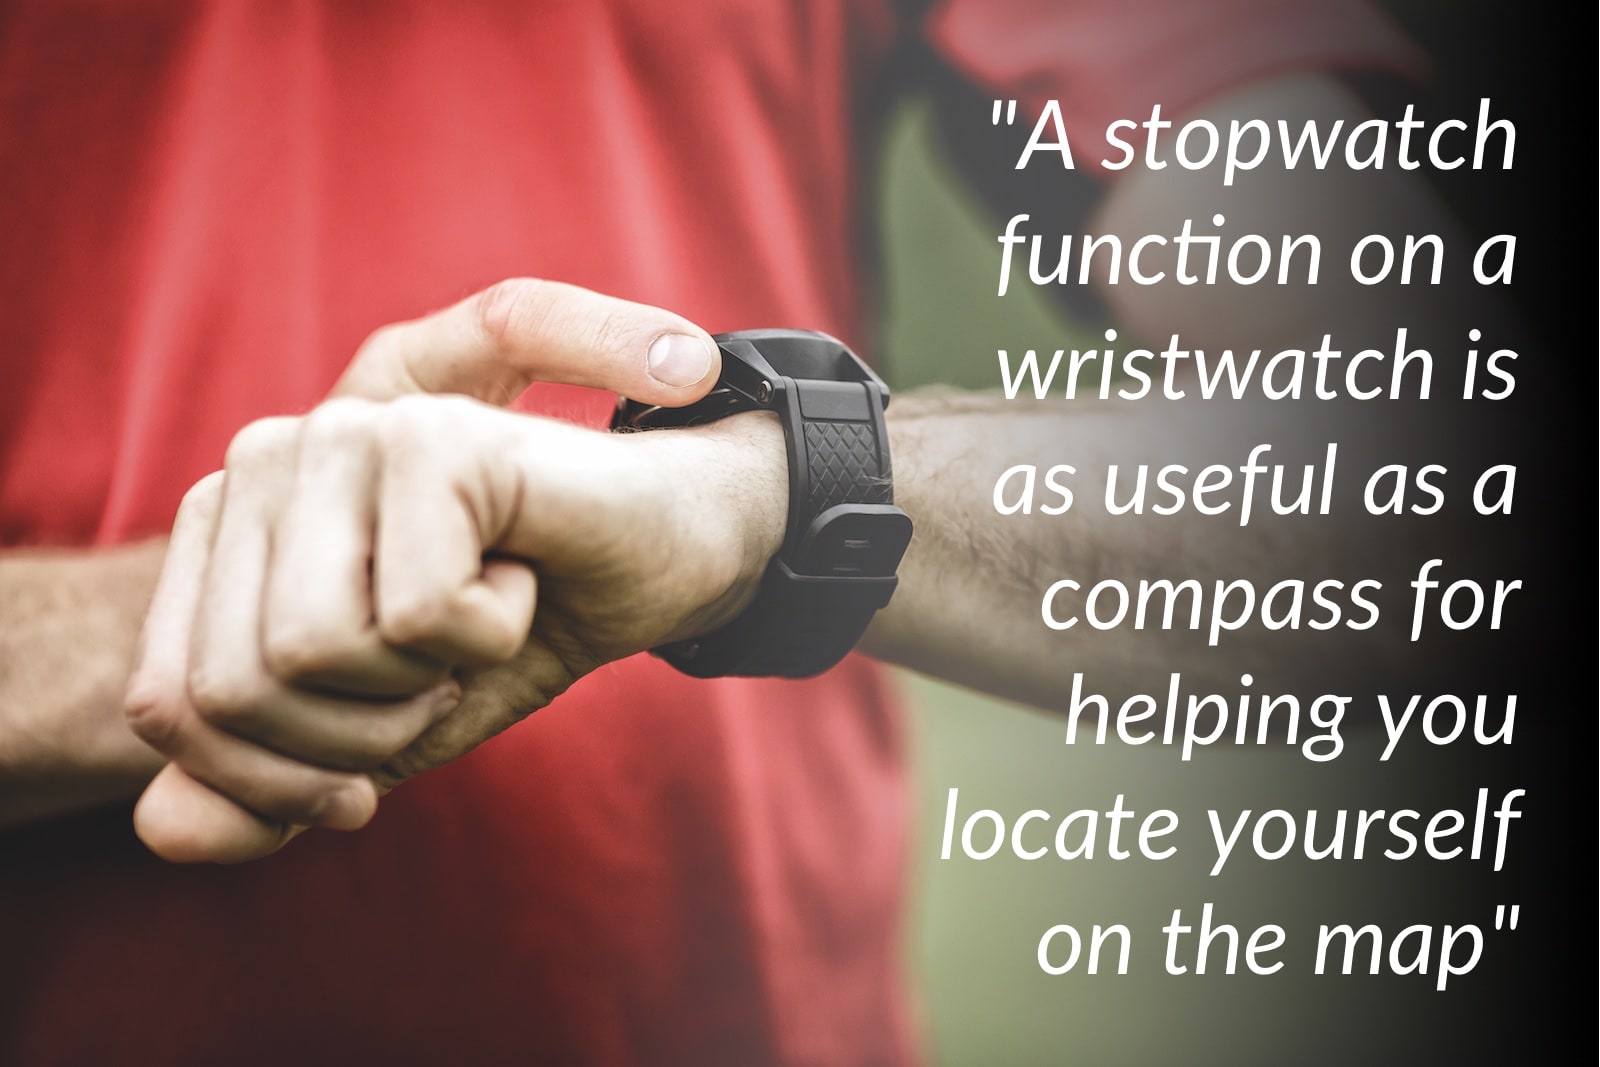 A stopwatch function on a wristwatch is as useful as a compass for helping you locate yourself on the map